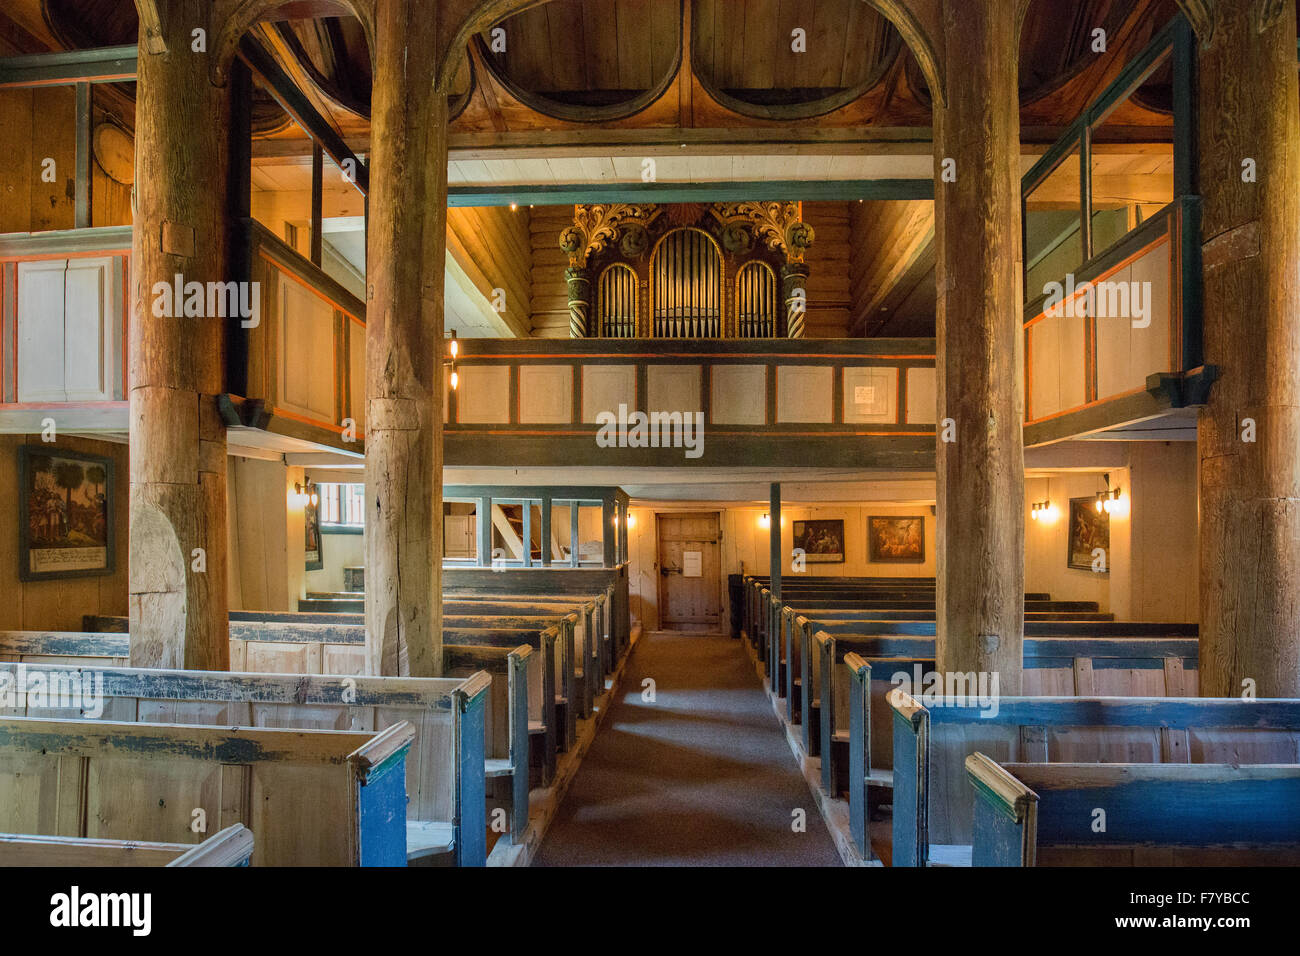 Interior of Lom stave church in Oppland central Norway showing the free standing wooden staves supporting the roof Stock Photo